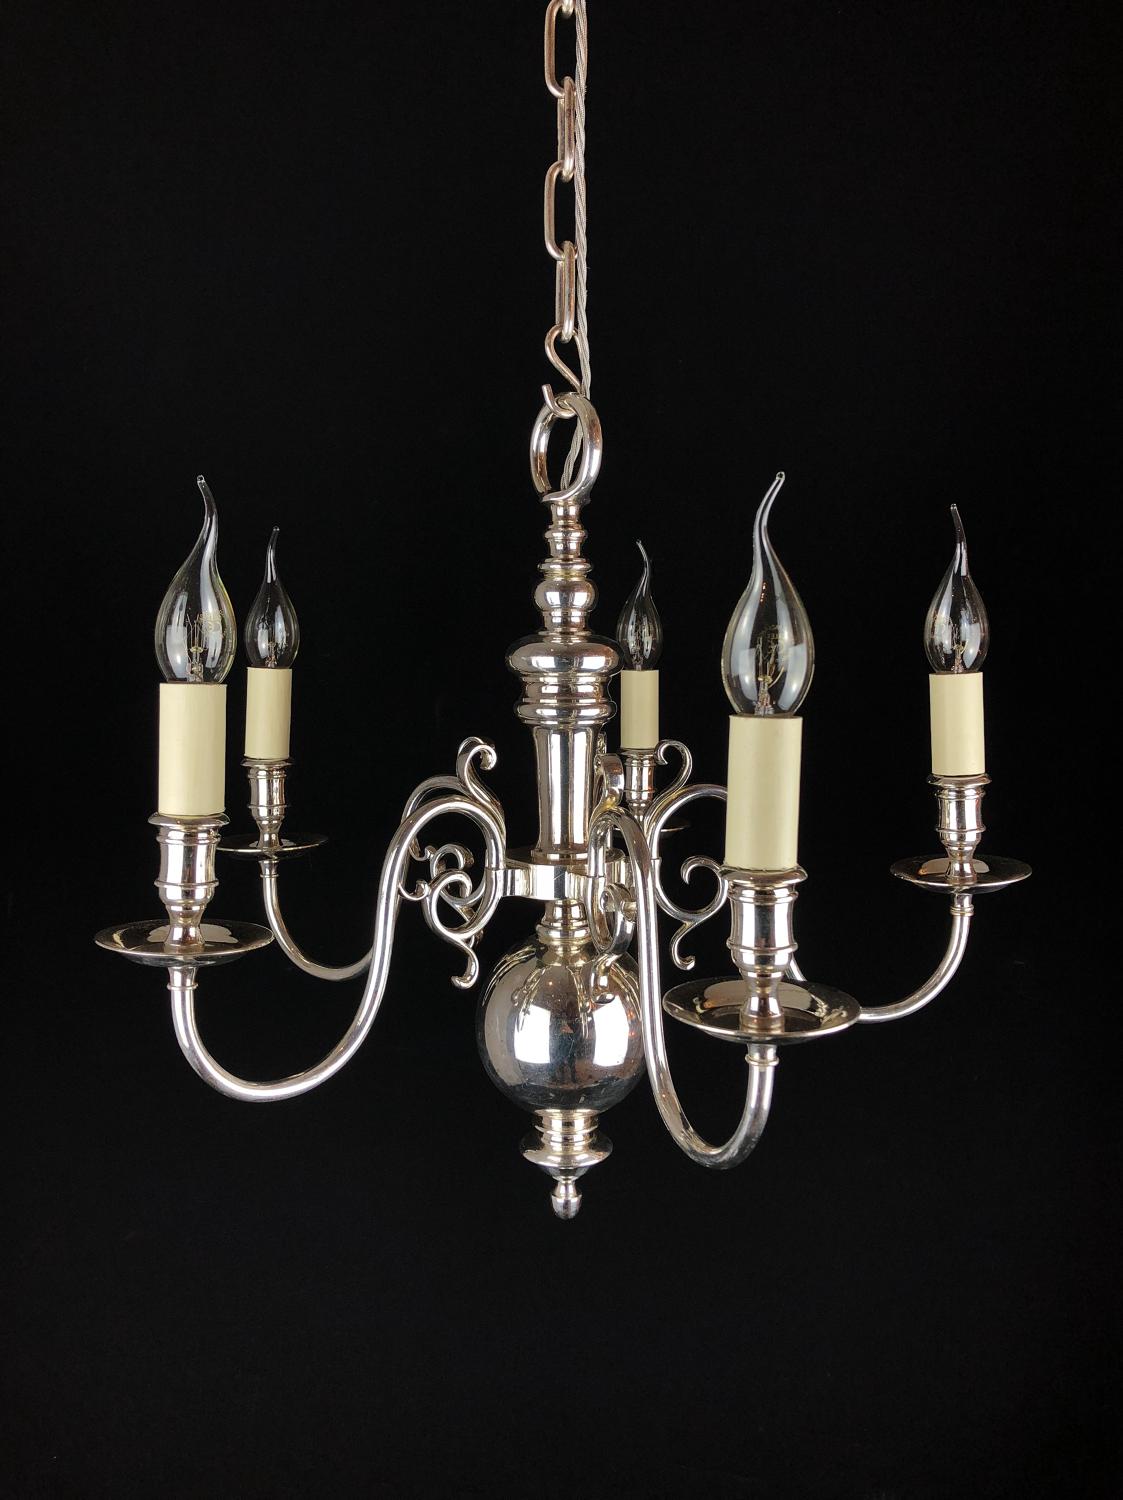 A silvered Dutch style chandelier